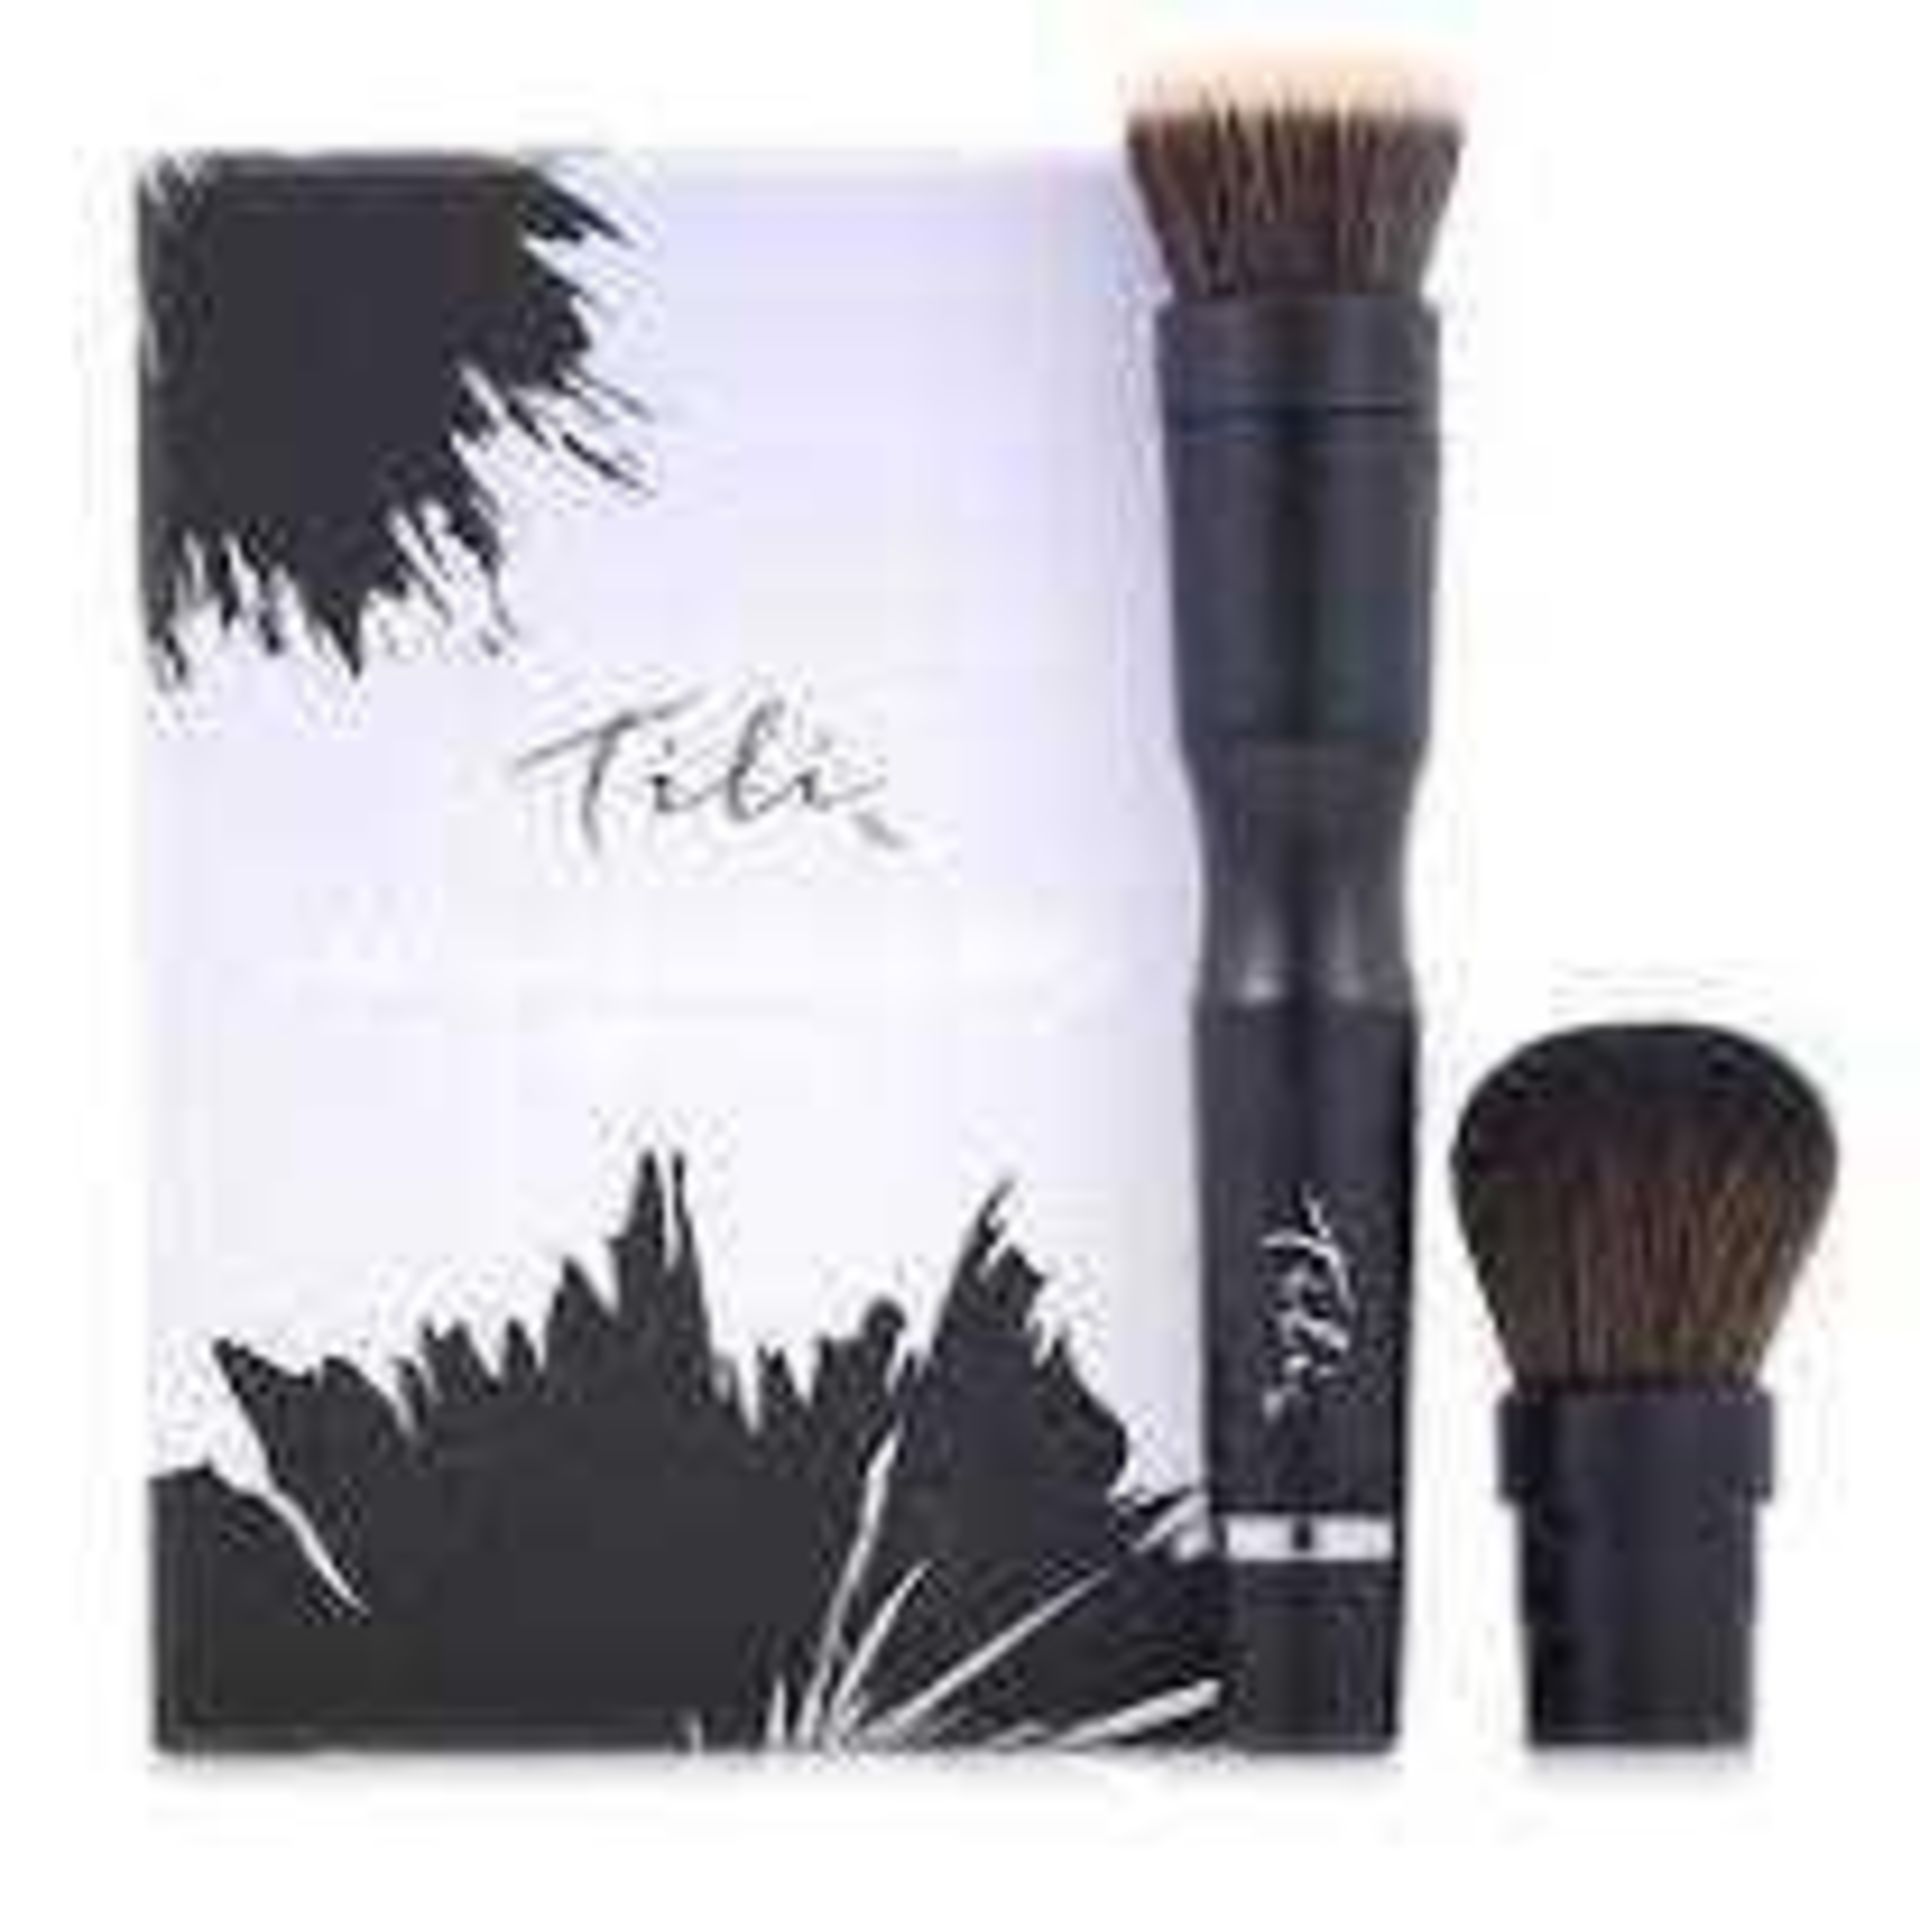 RRP £100 Lot To Contain X2 Items, Tili Make Up Blending Brush, Tili Pro Anti-Aging Hot And Cold Devi